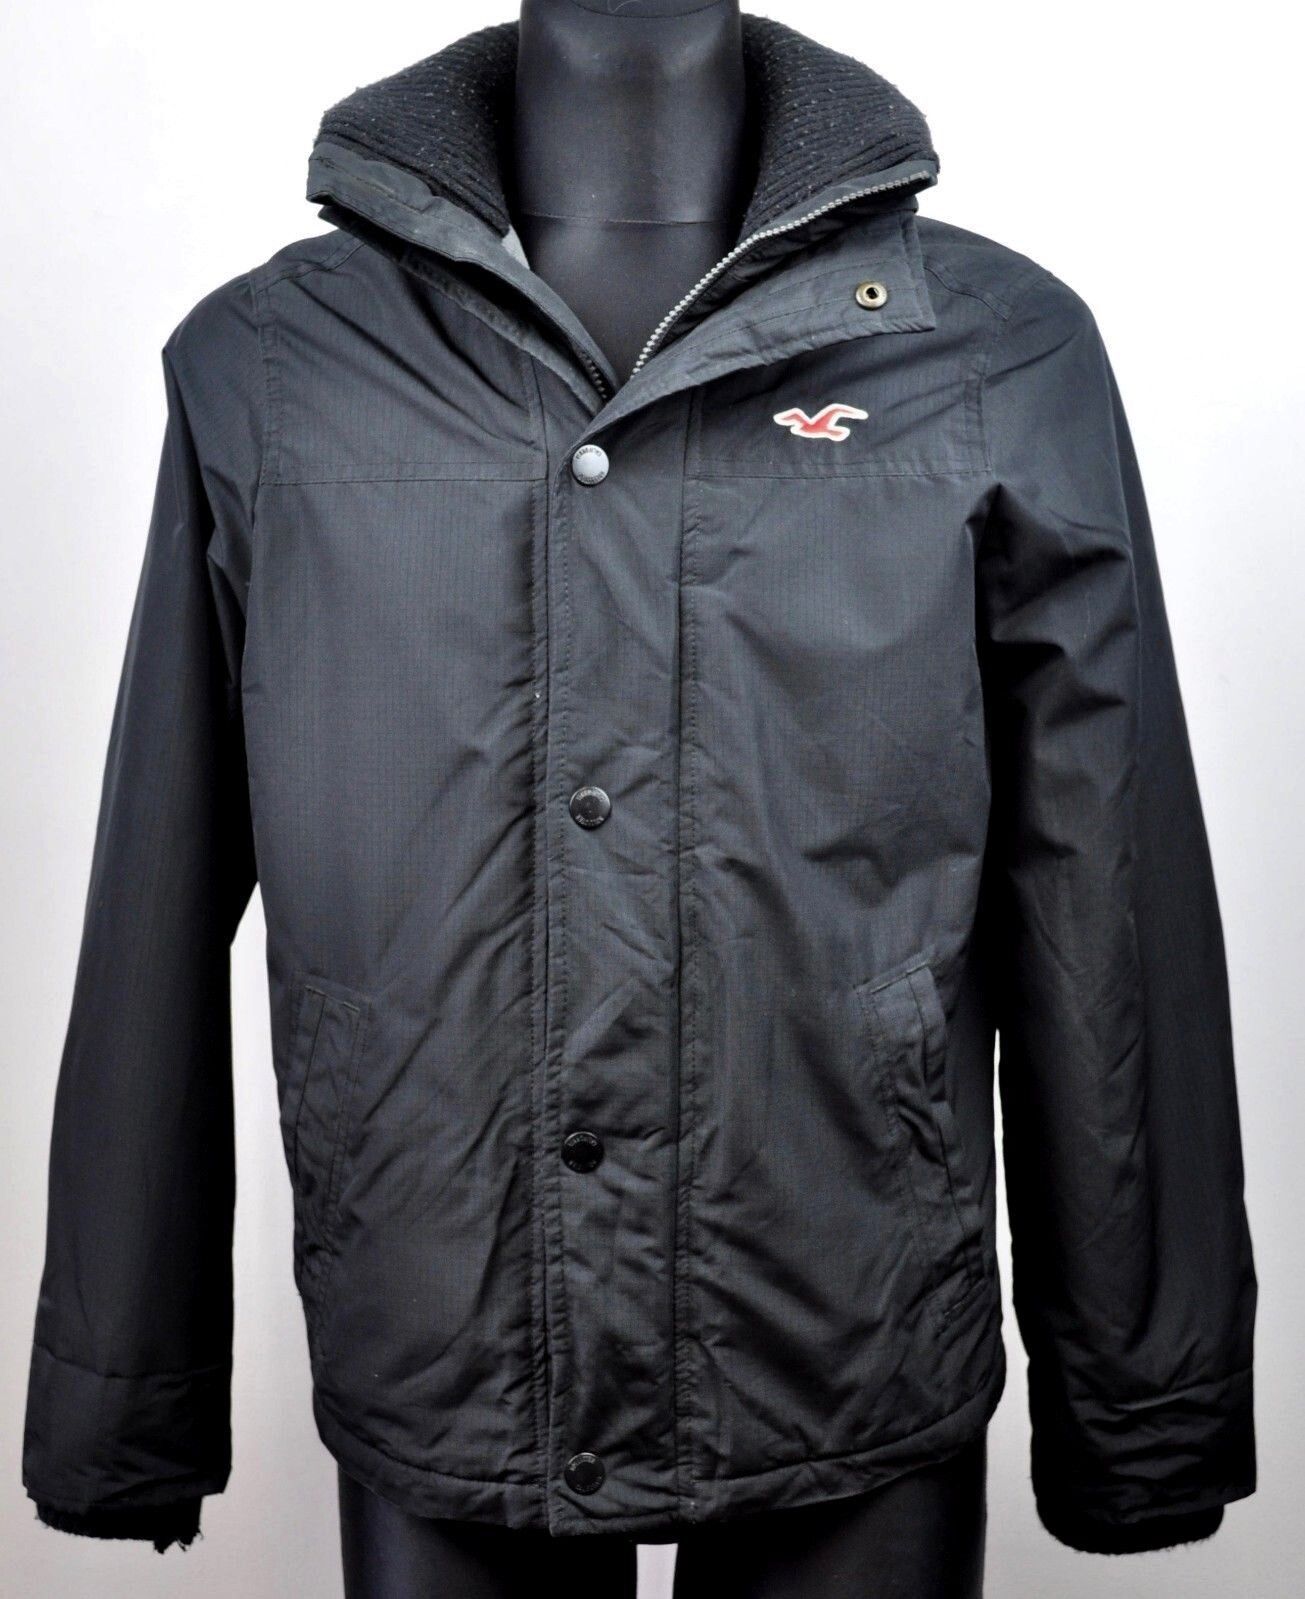 Hollister All Weather Jacket